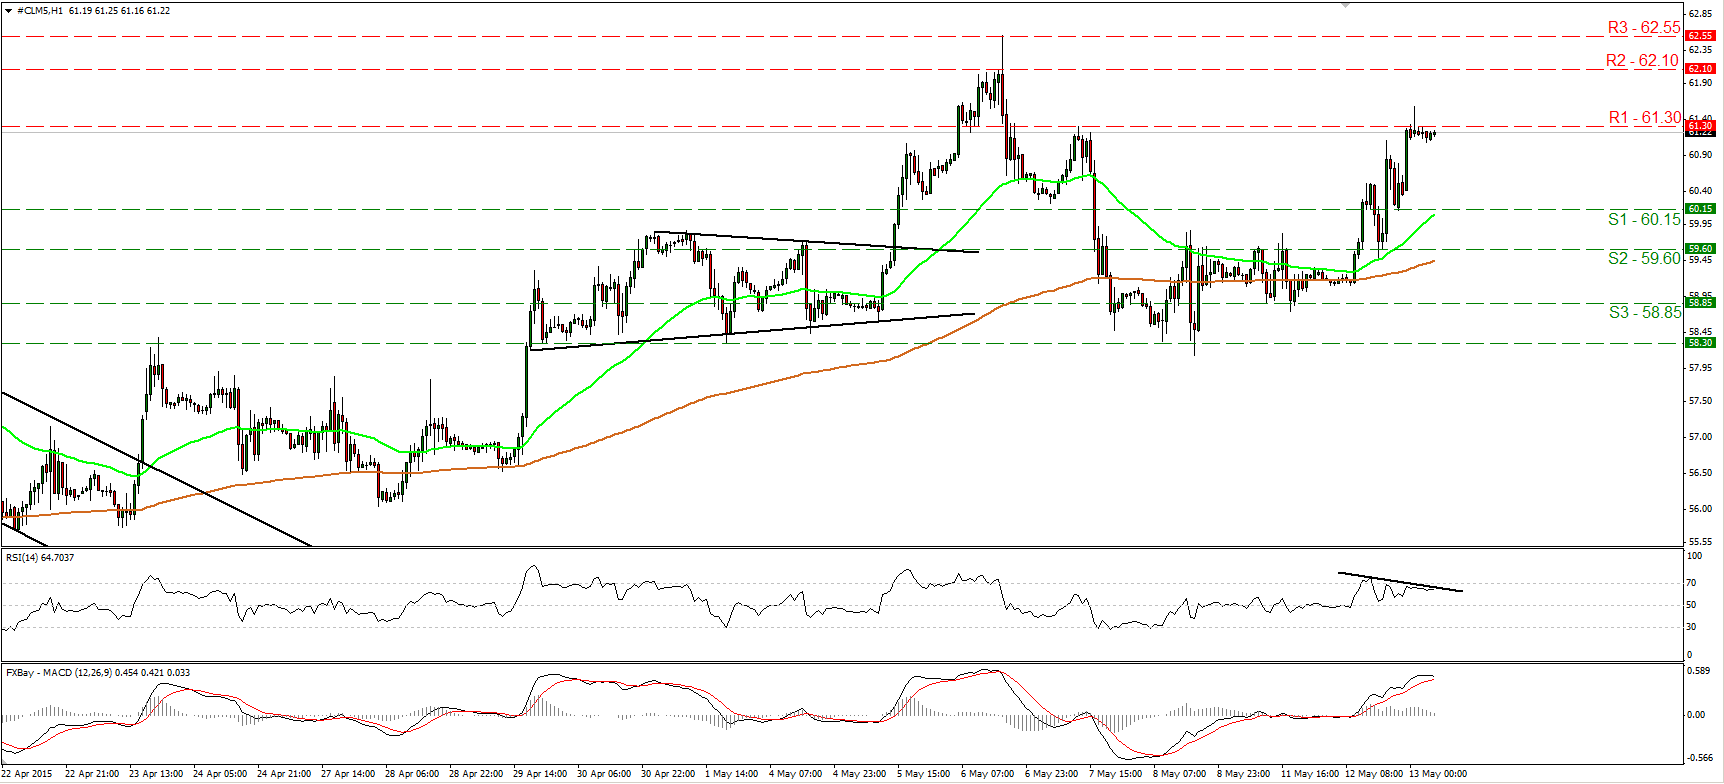 WTI Hourly Chart April 22nd-May 8th